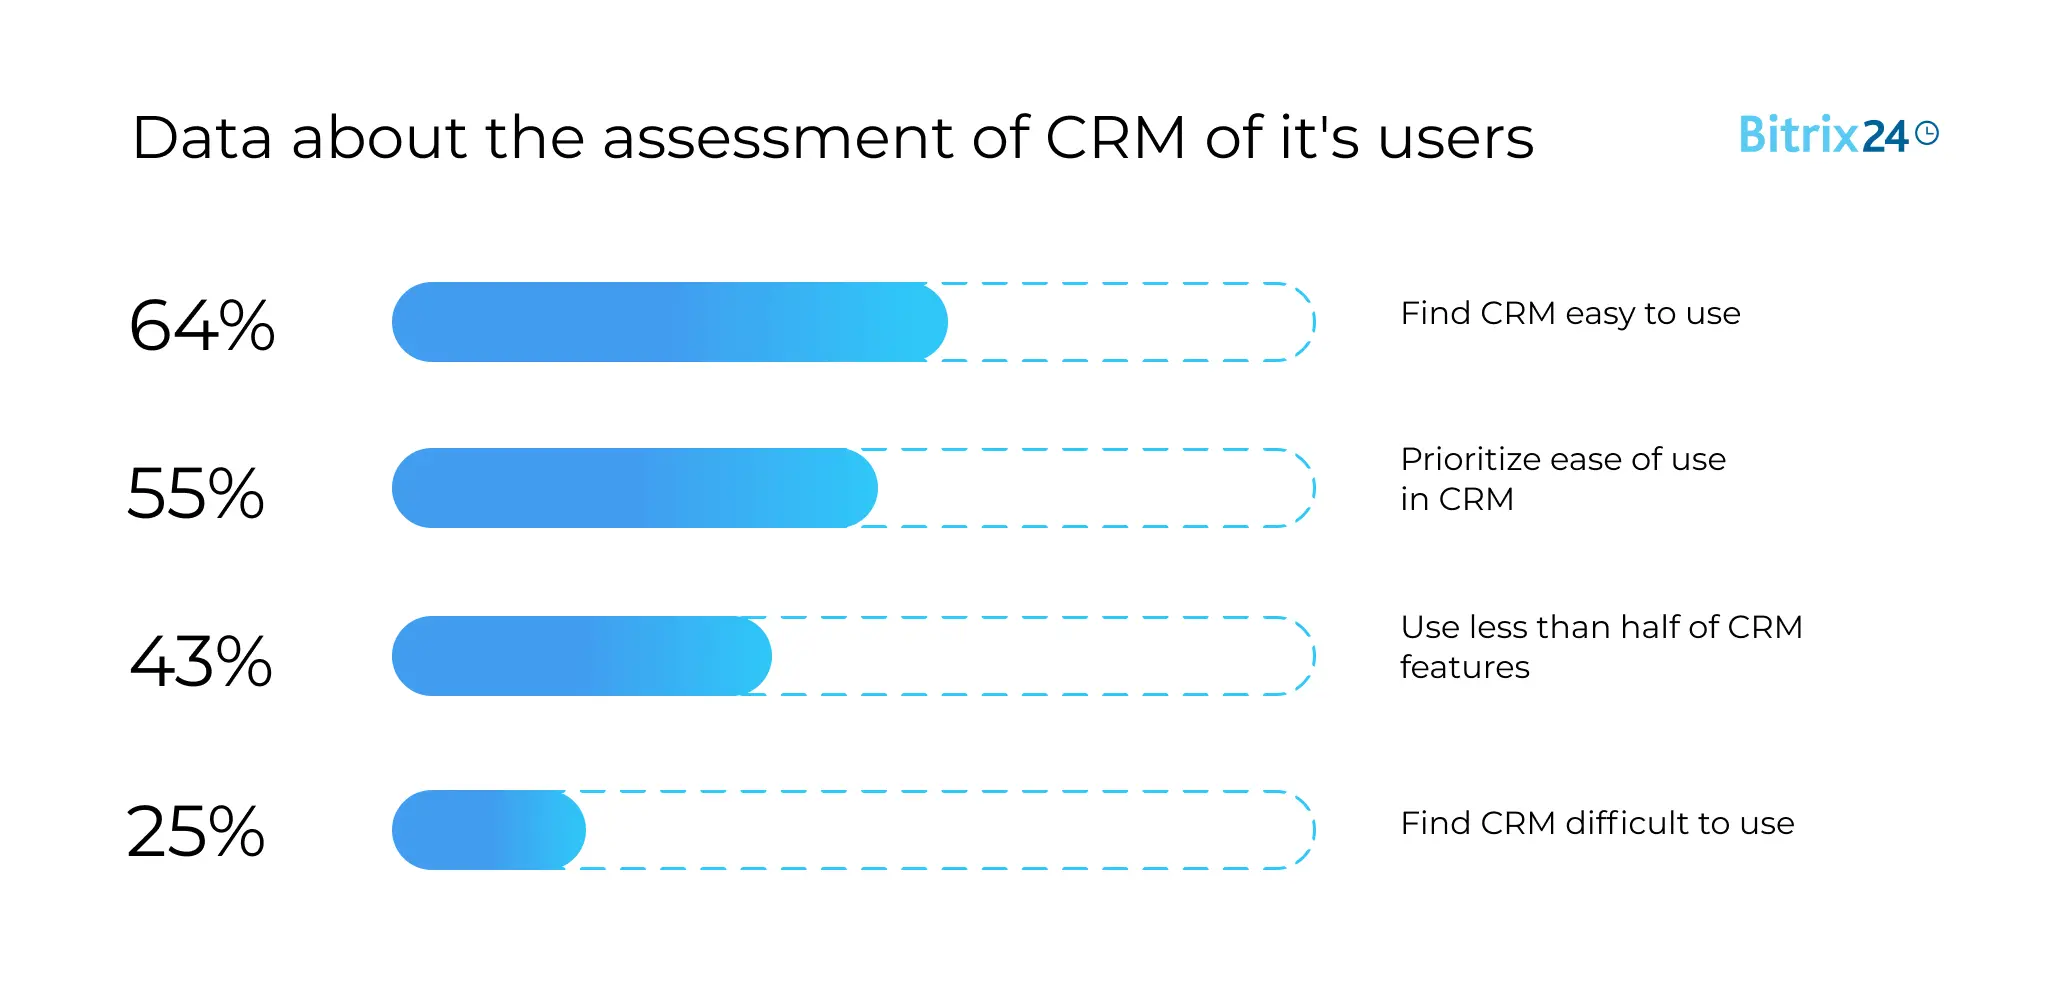 Data about the assessment of CRM of it's users